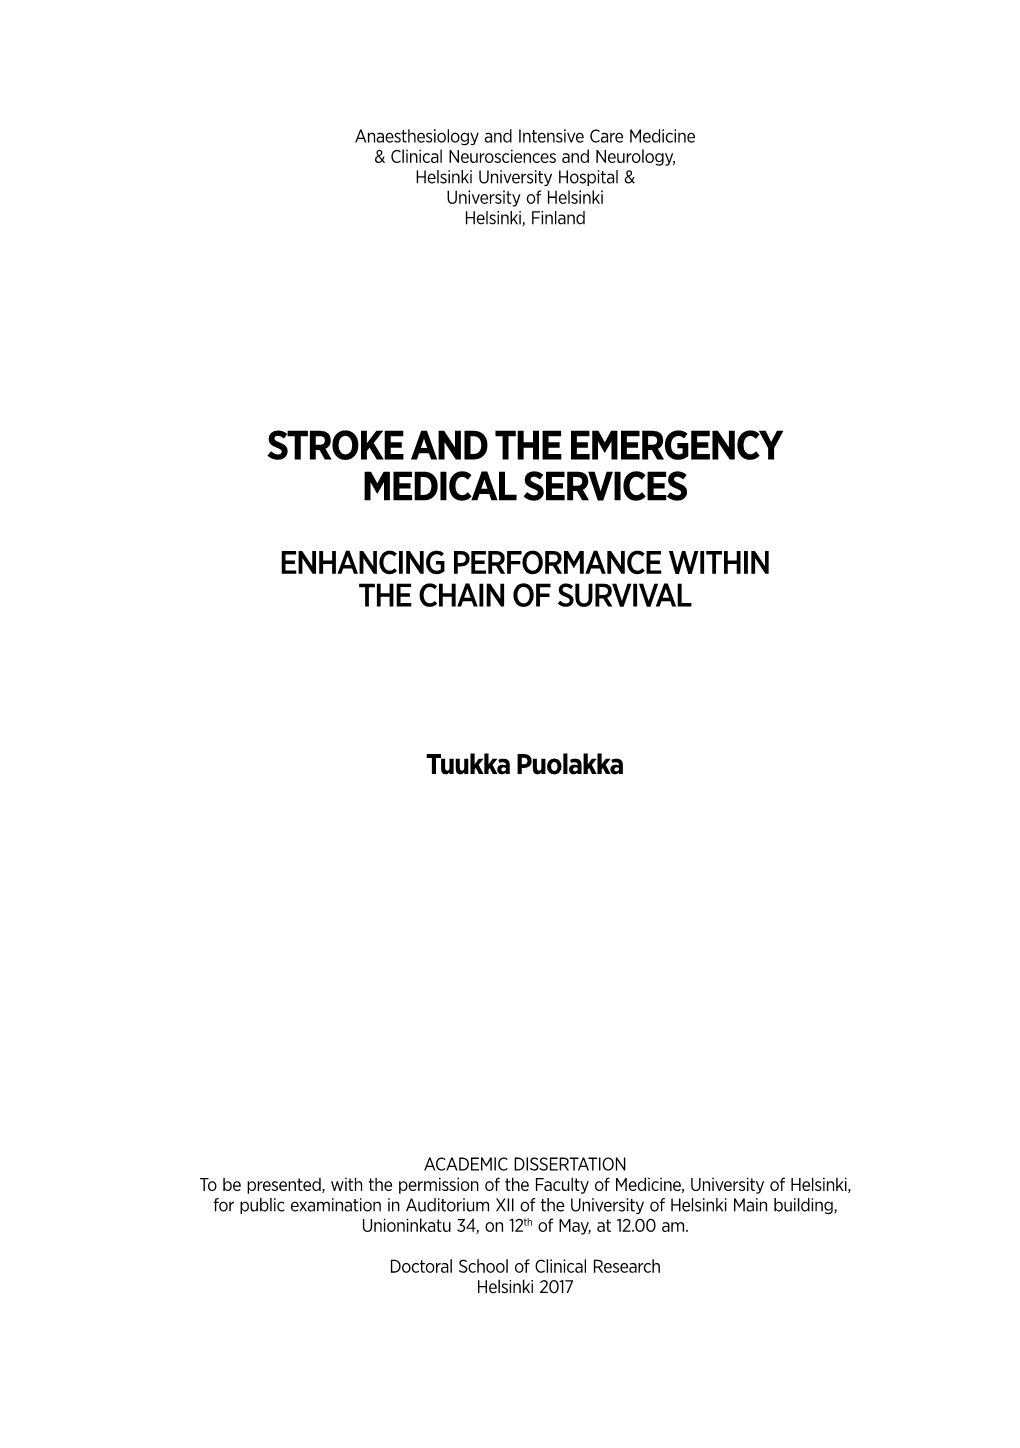 Stroke and the Emergency Medical Services